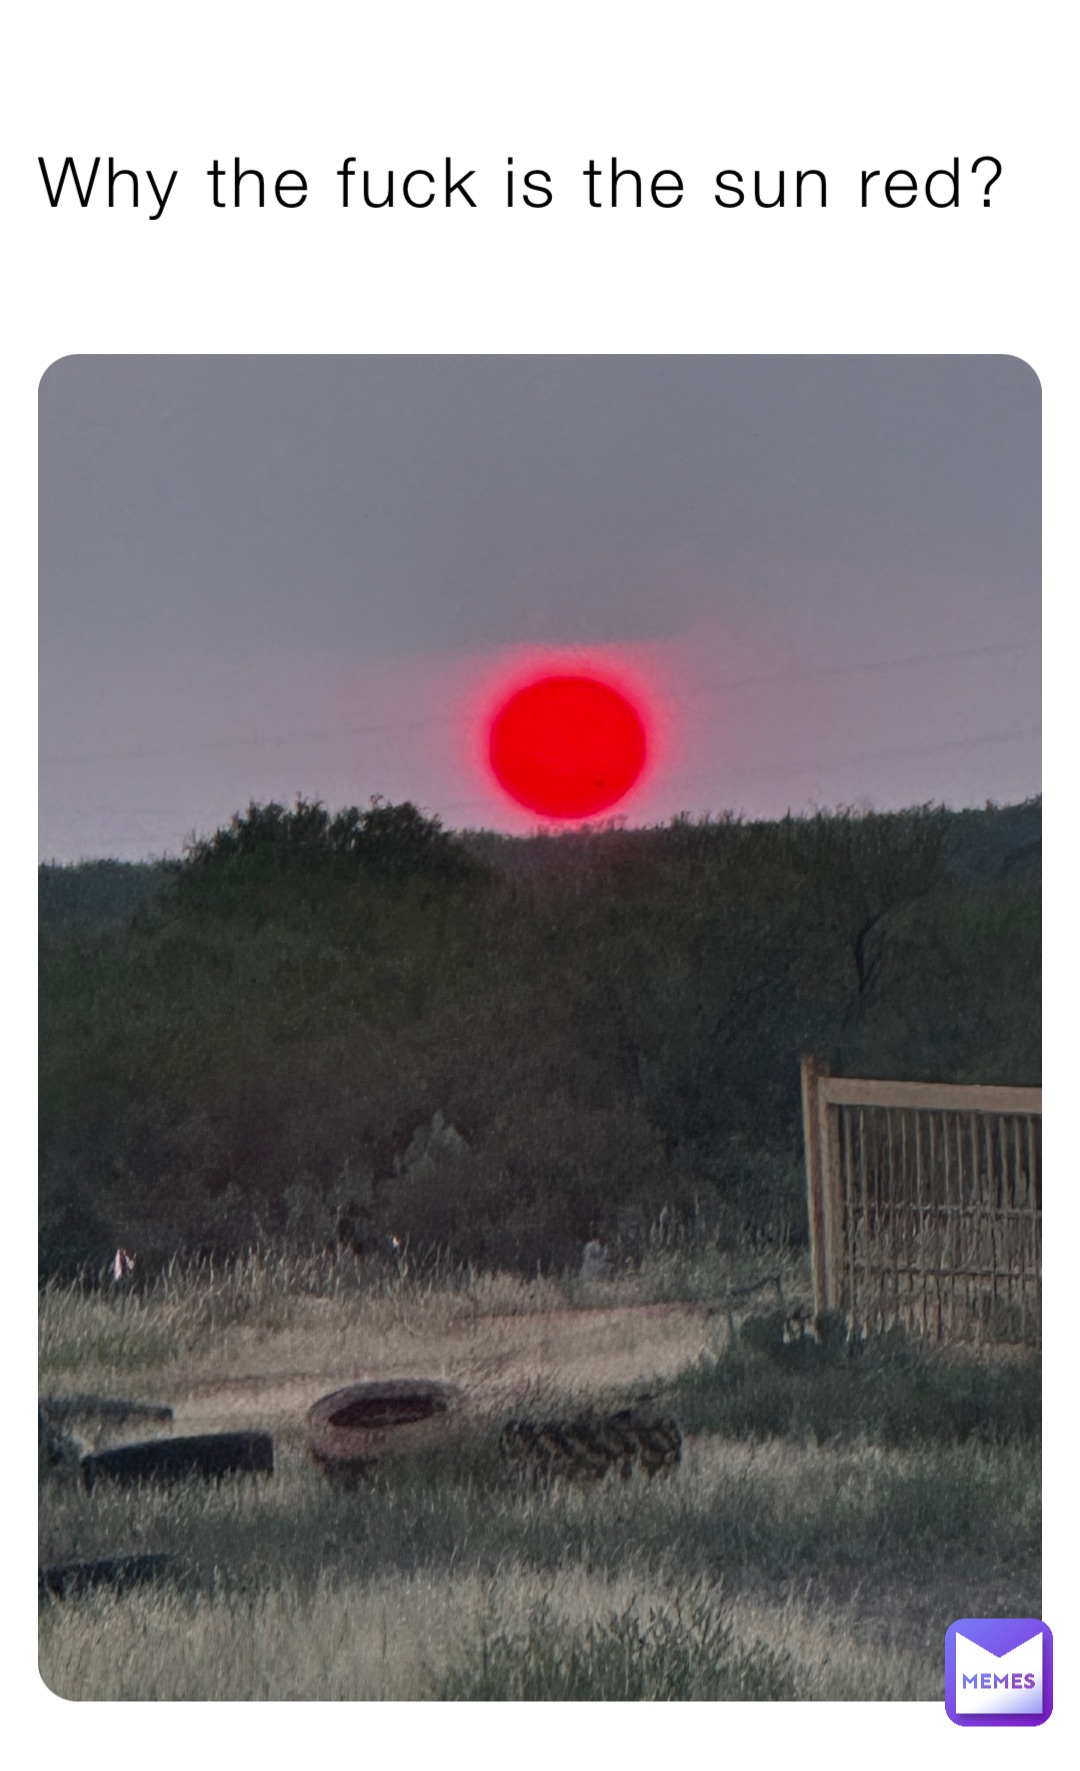 Why the fuck is the sun red?